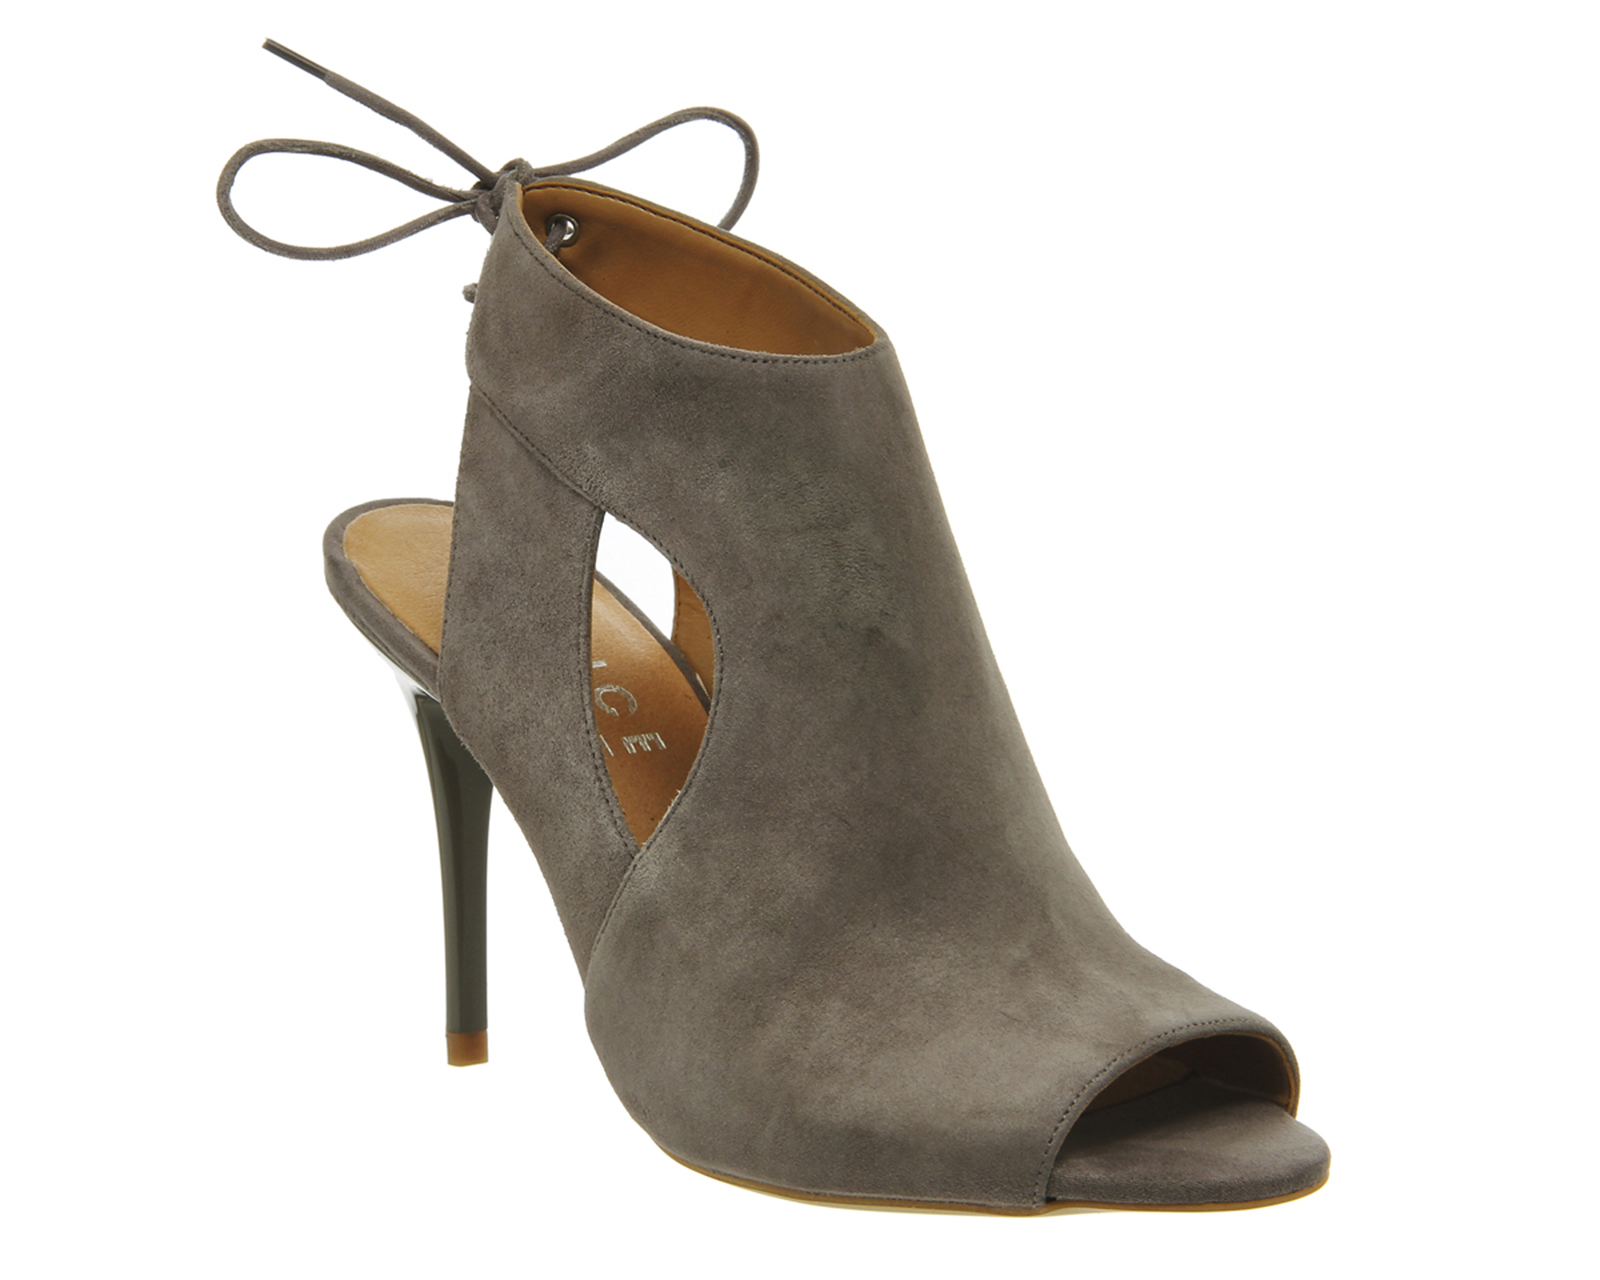 OFFICEQuiver Cut Out Shoe BootsGrey Suede